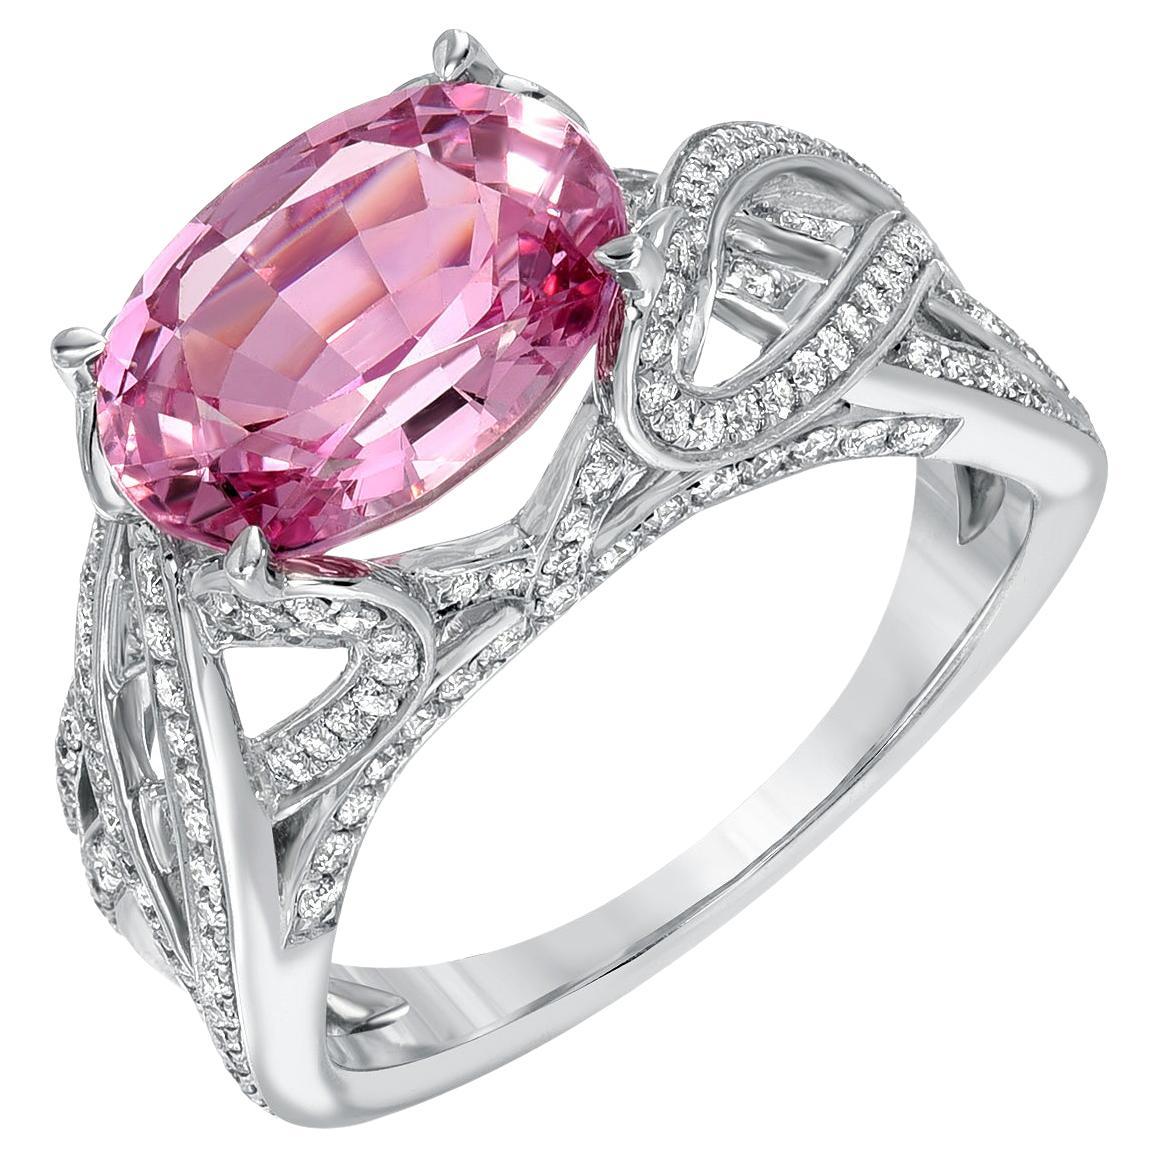 Pink Spinel Ring Oval 3.18 Carats For Sale